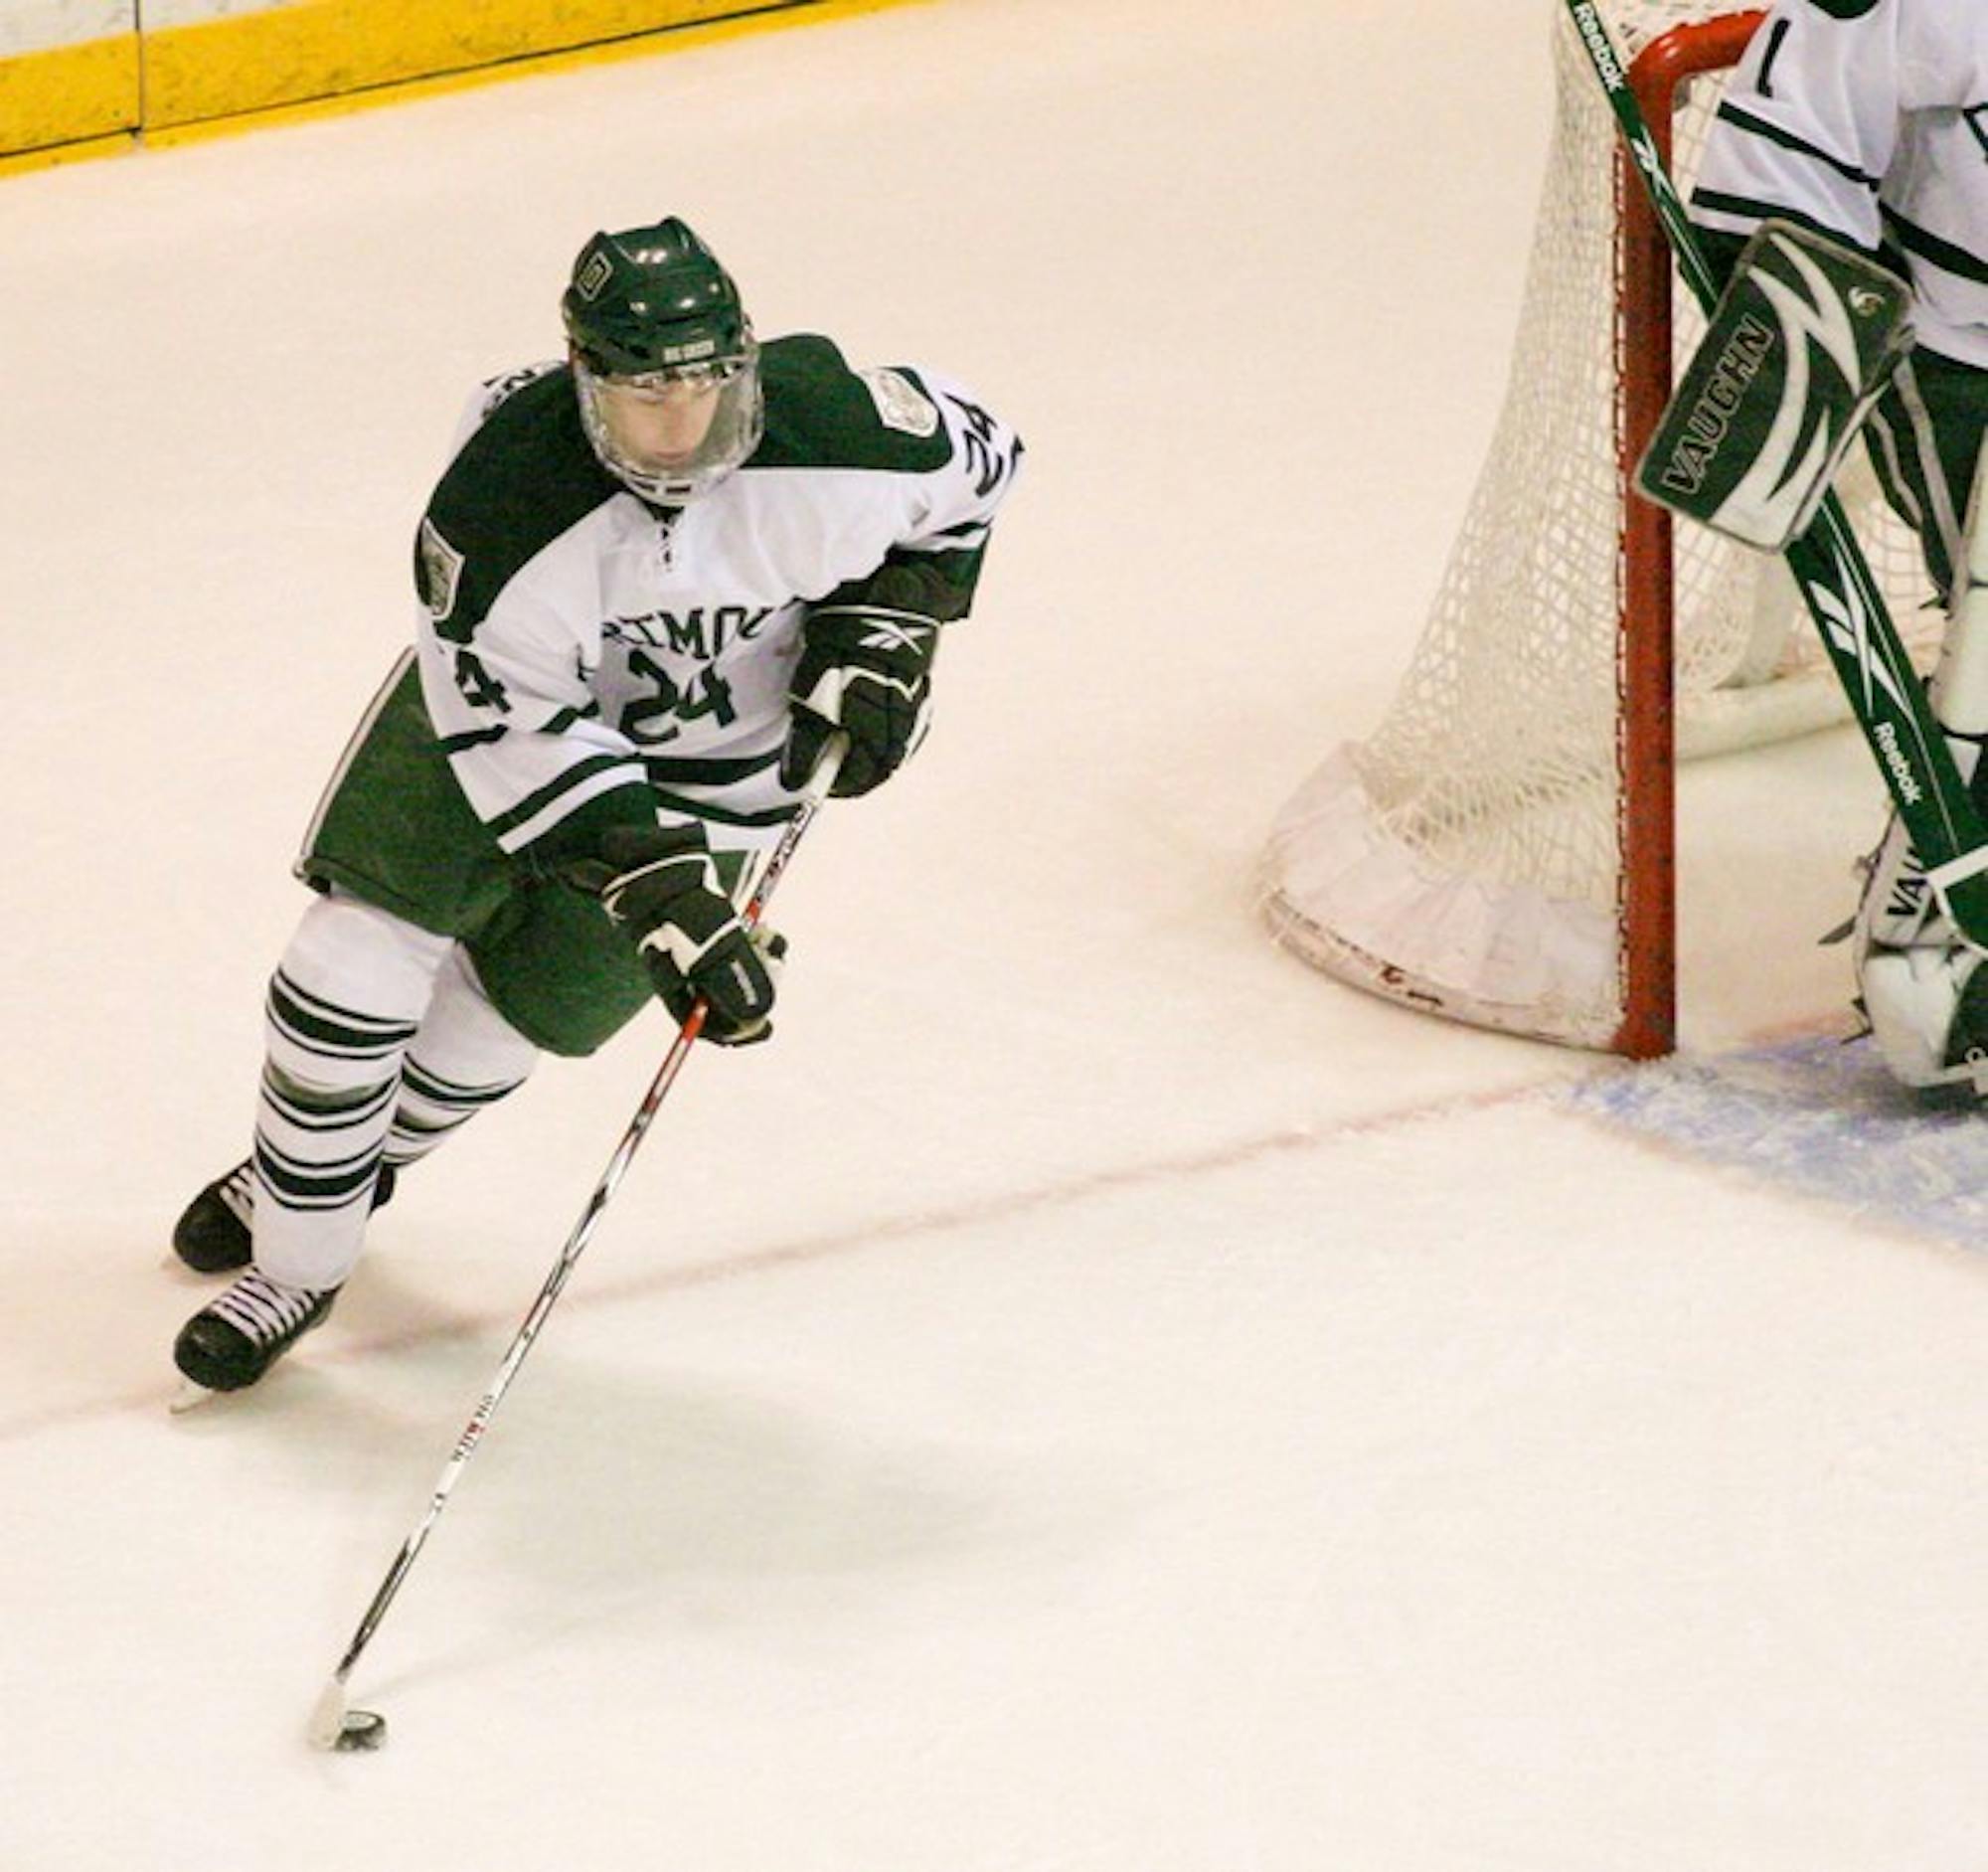 The Big Green shut out No. 8 Princeton with a 4-0 victory Sunday night.